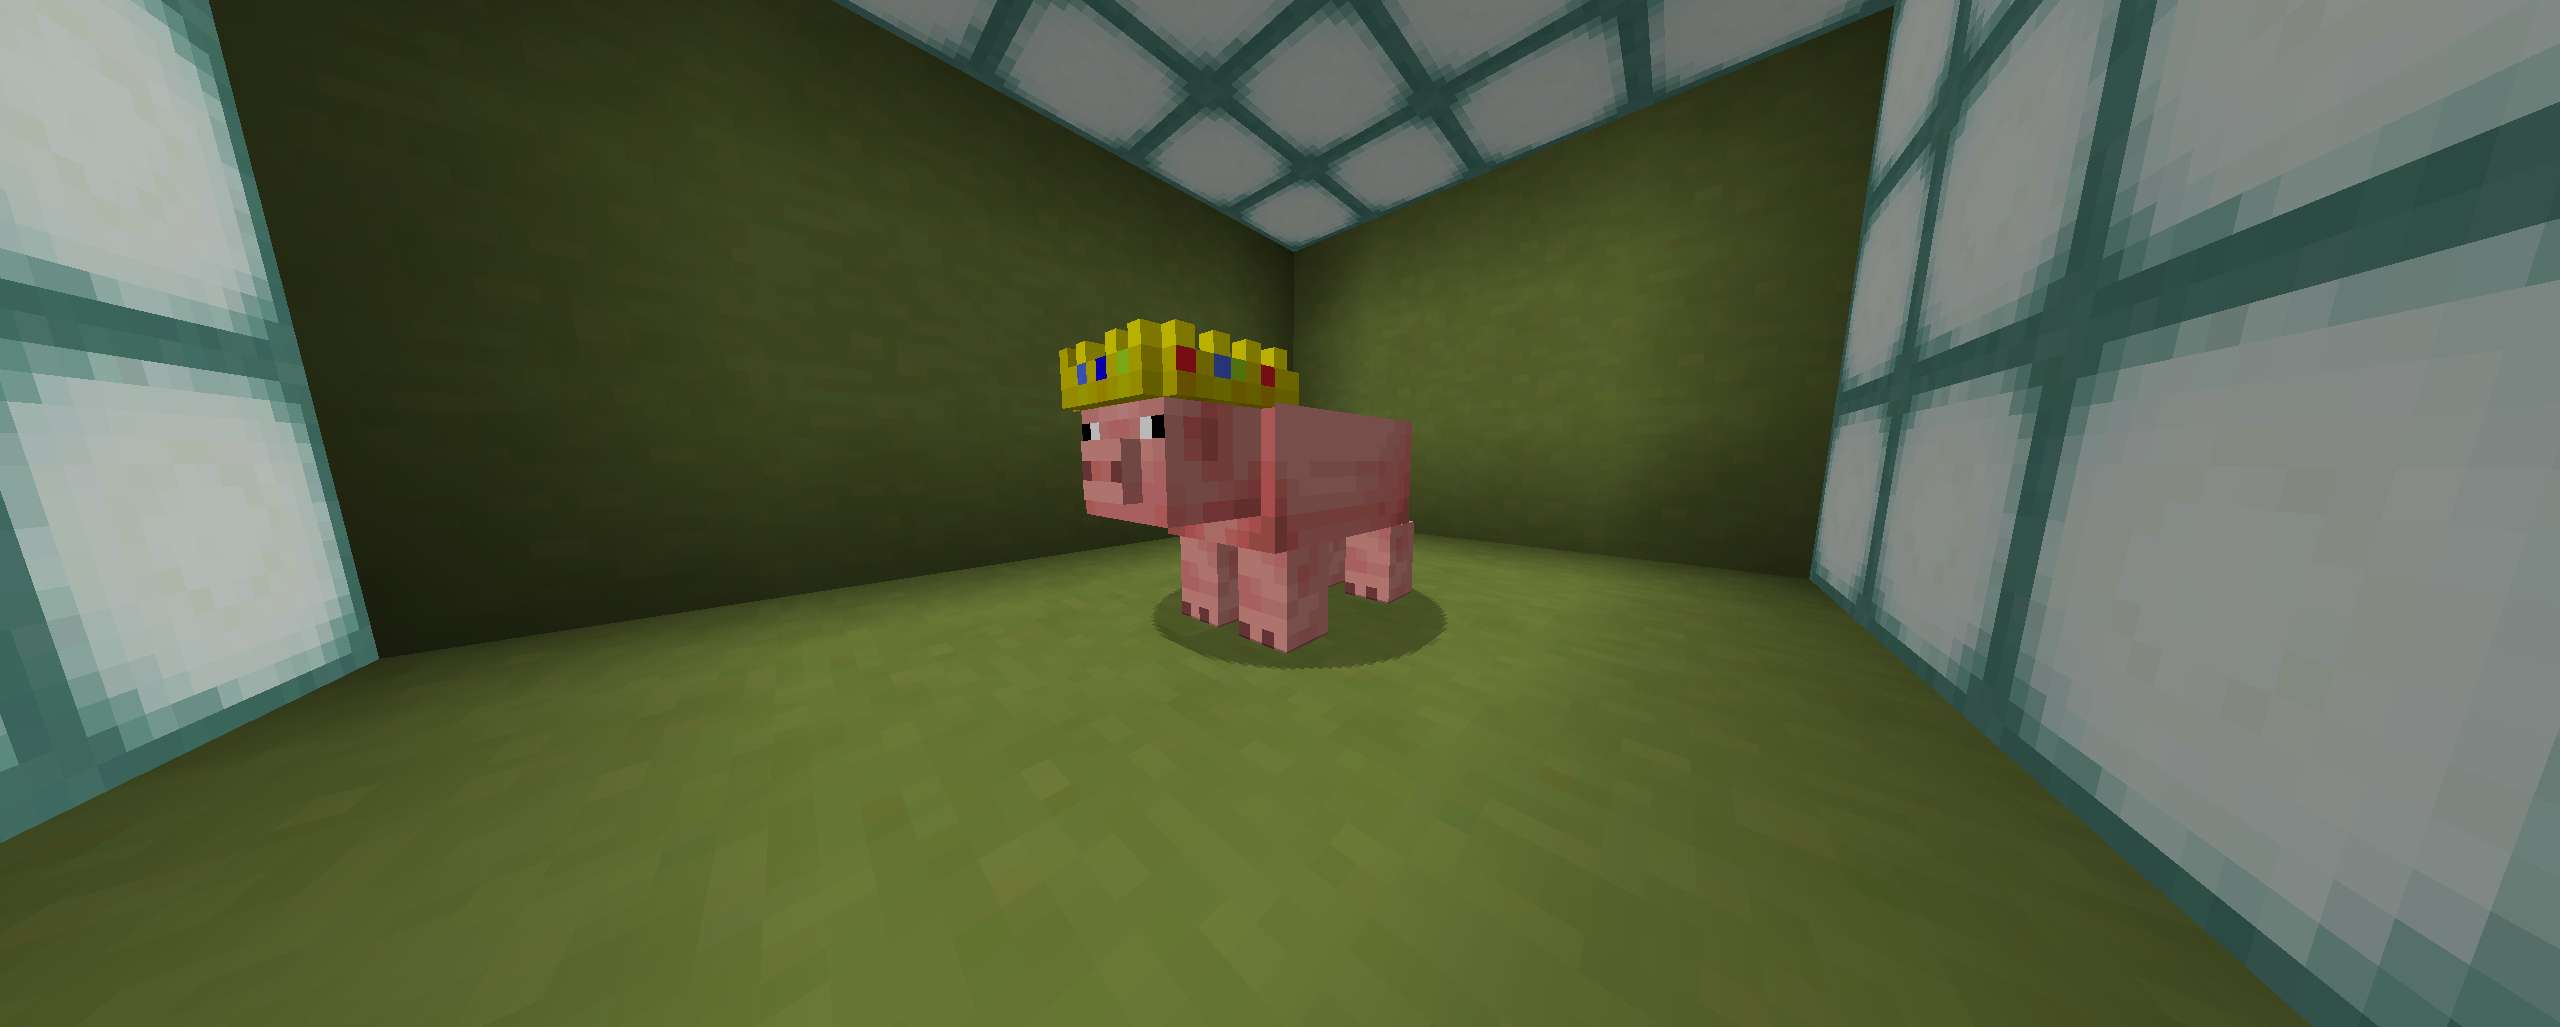 Gallery Image 1 for Technoblade Pigs - 3D (Optifine) on vVPRP